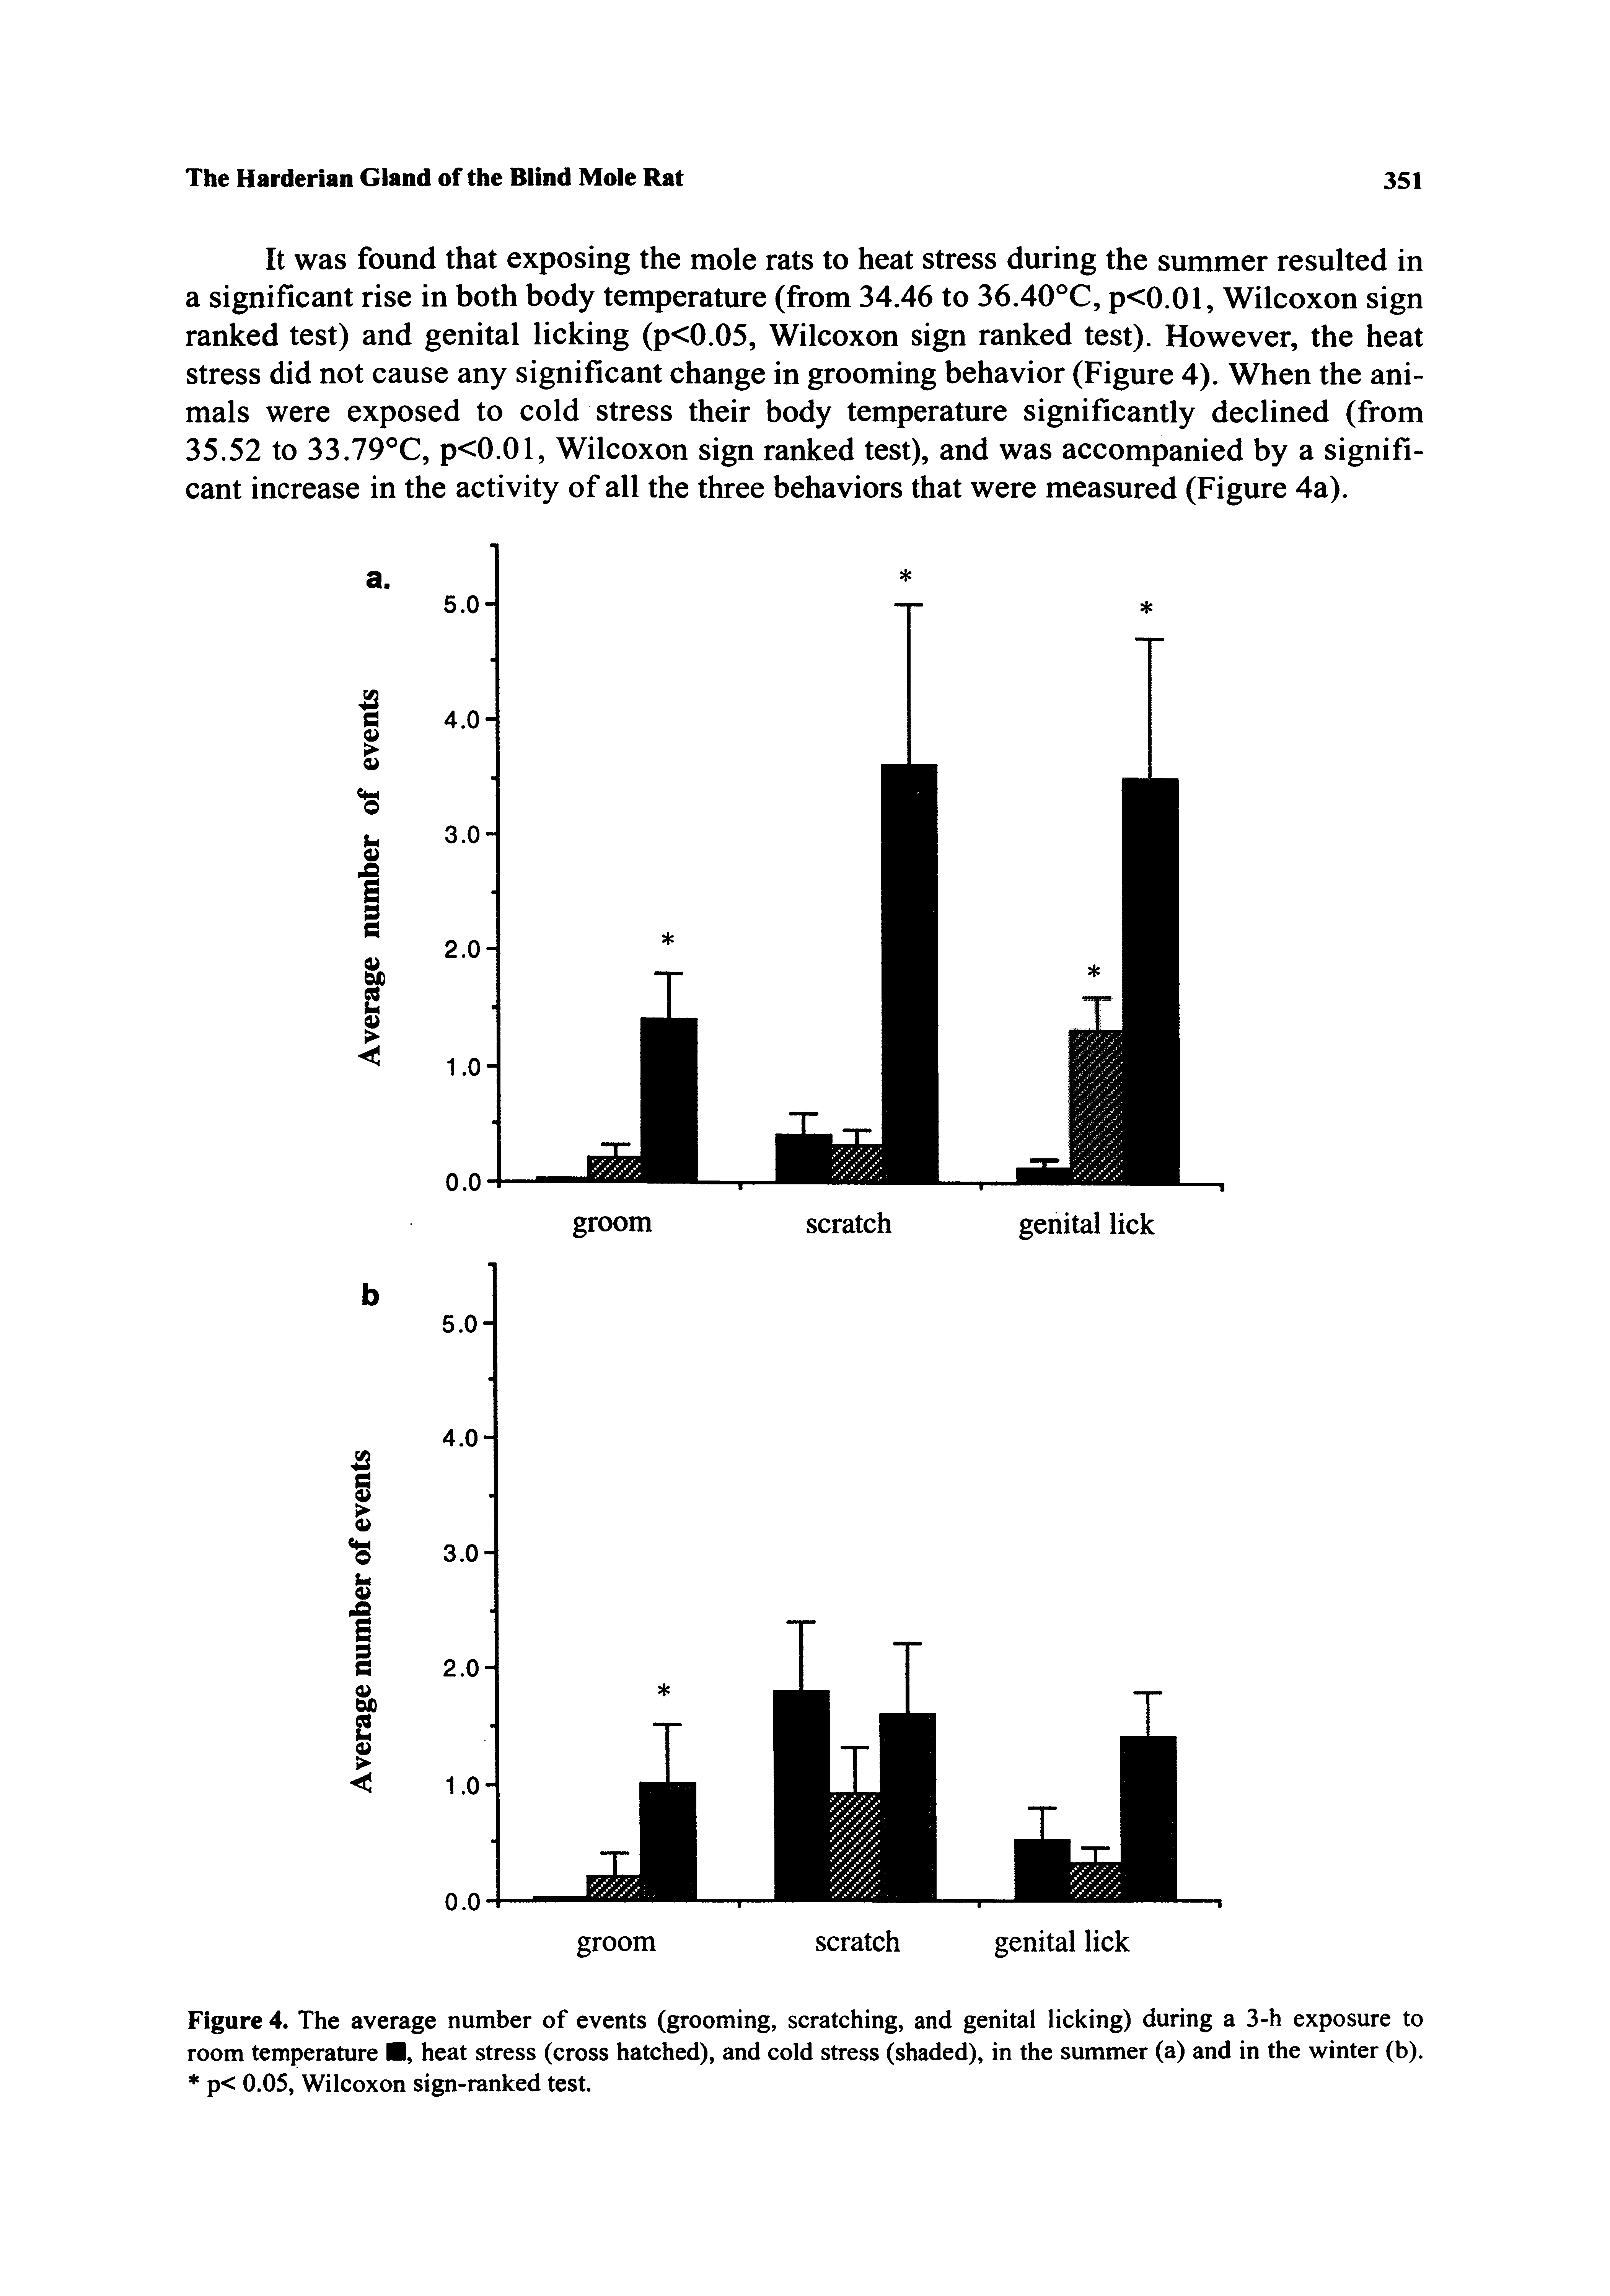 Figure 4. The average number of events (grooming, scratching, and genital licking) during a 3-h exposure to room temperature , heat stress (cross hatched), and cold stress (shaded), in the summer (a) and in the winter (b). p< 0.05, Wilcoxon sign-ranked test.